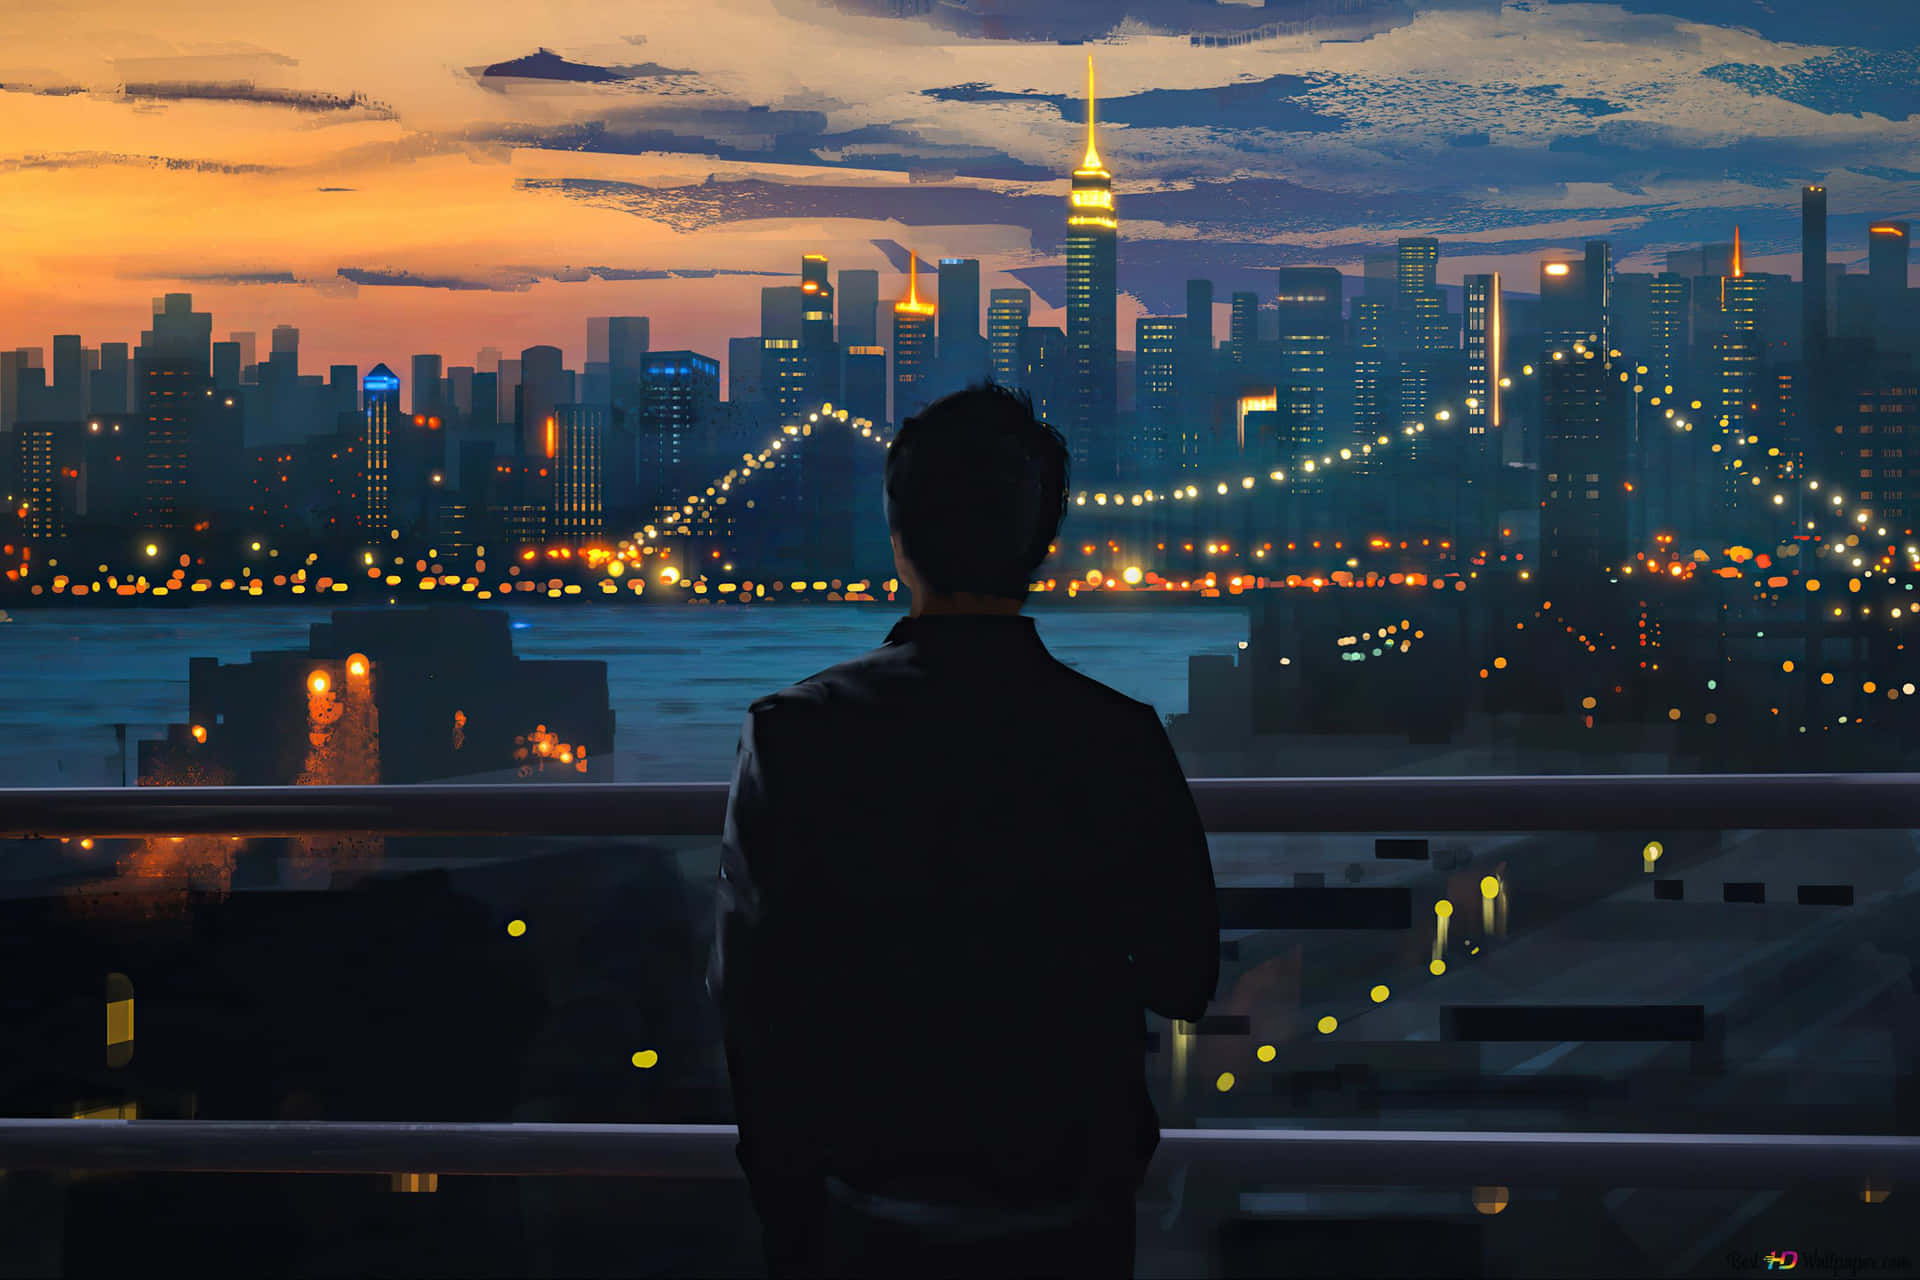 A Man Looking Out Over The City